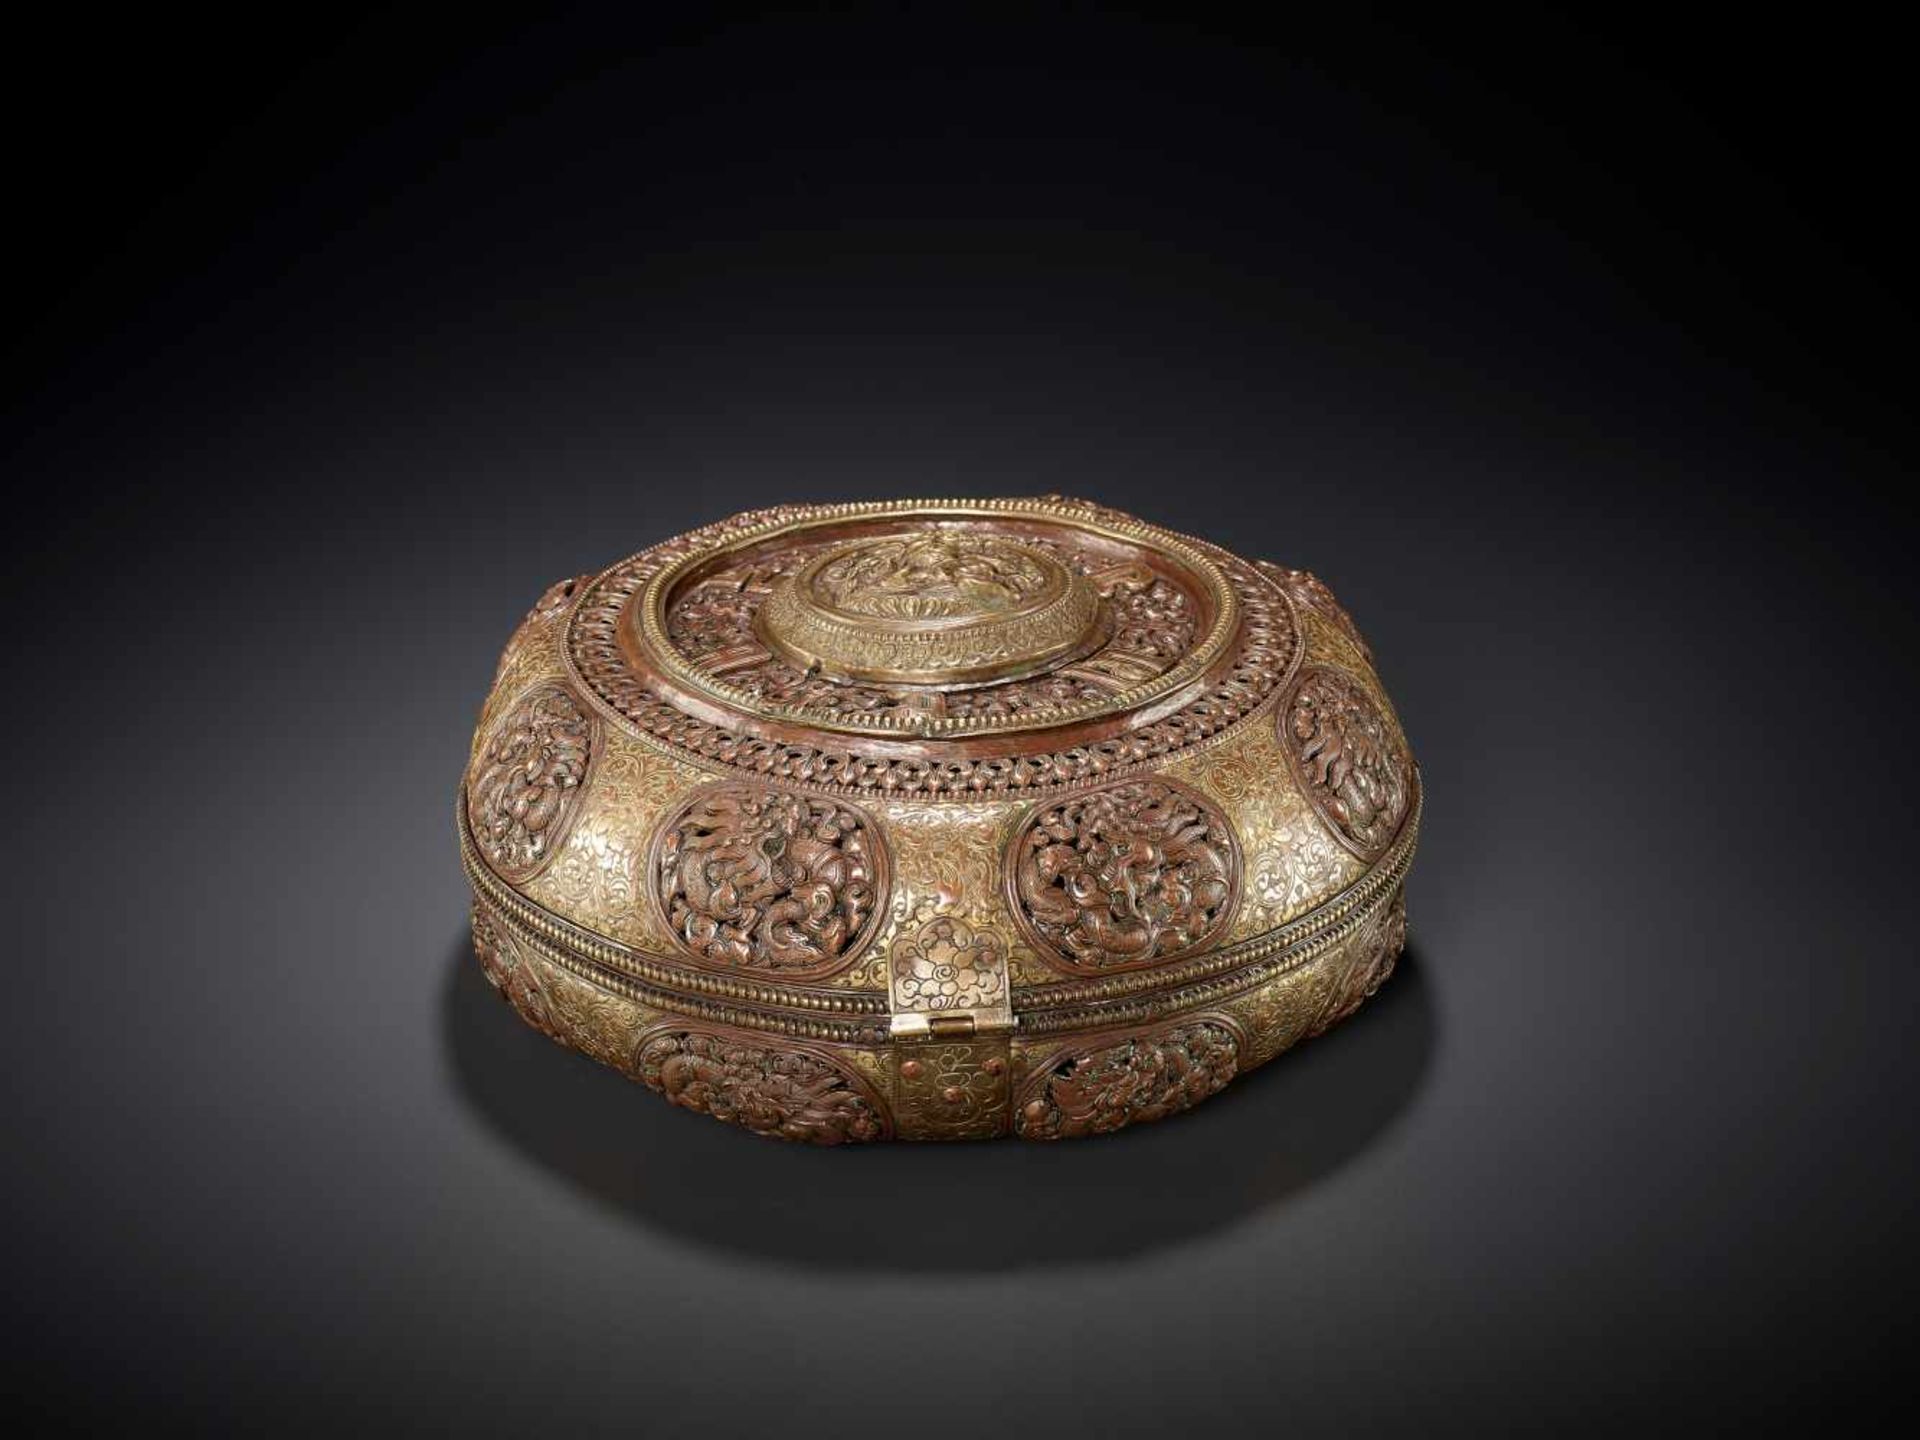 A GILT COPPER REPOUSSÉ RICE CONTAINER Tibet, 17th – 18th century. Finely engraved, embossed and